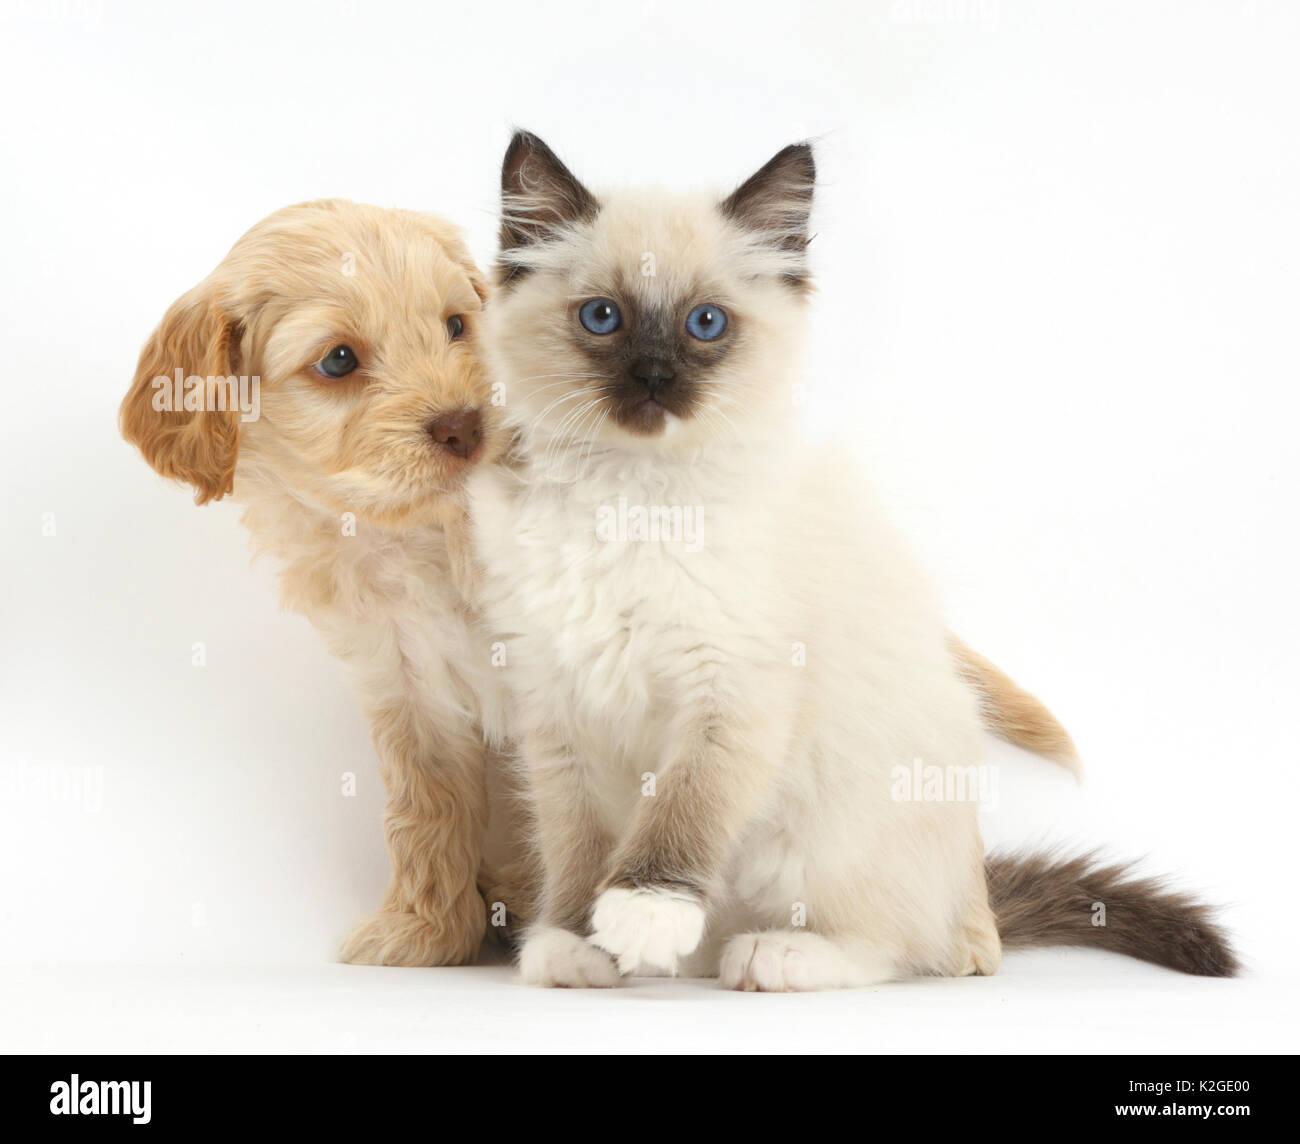 Ragdoll kitten and Cockapoo (Cavalier King Charles Spaniel cross Poodle) puppy. Stock Photo